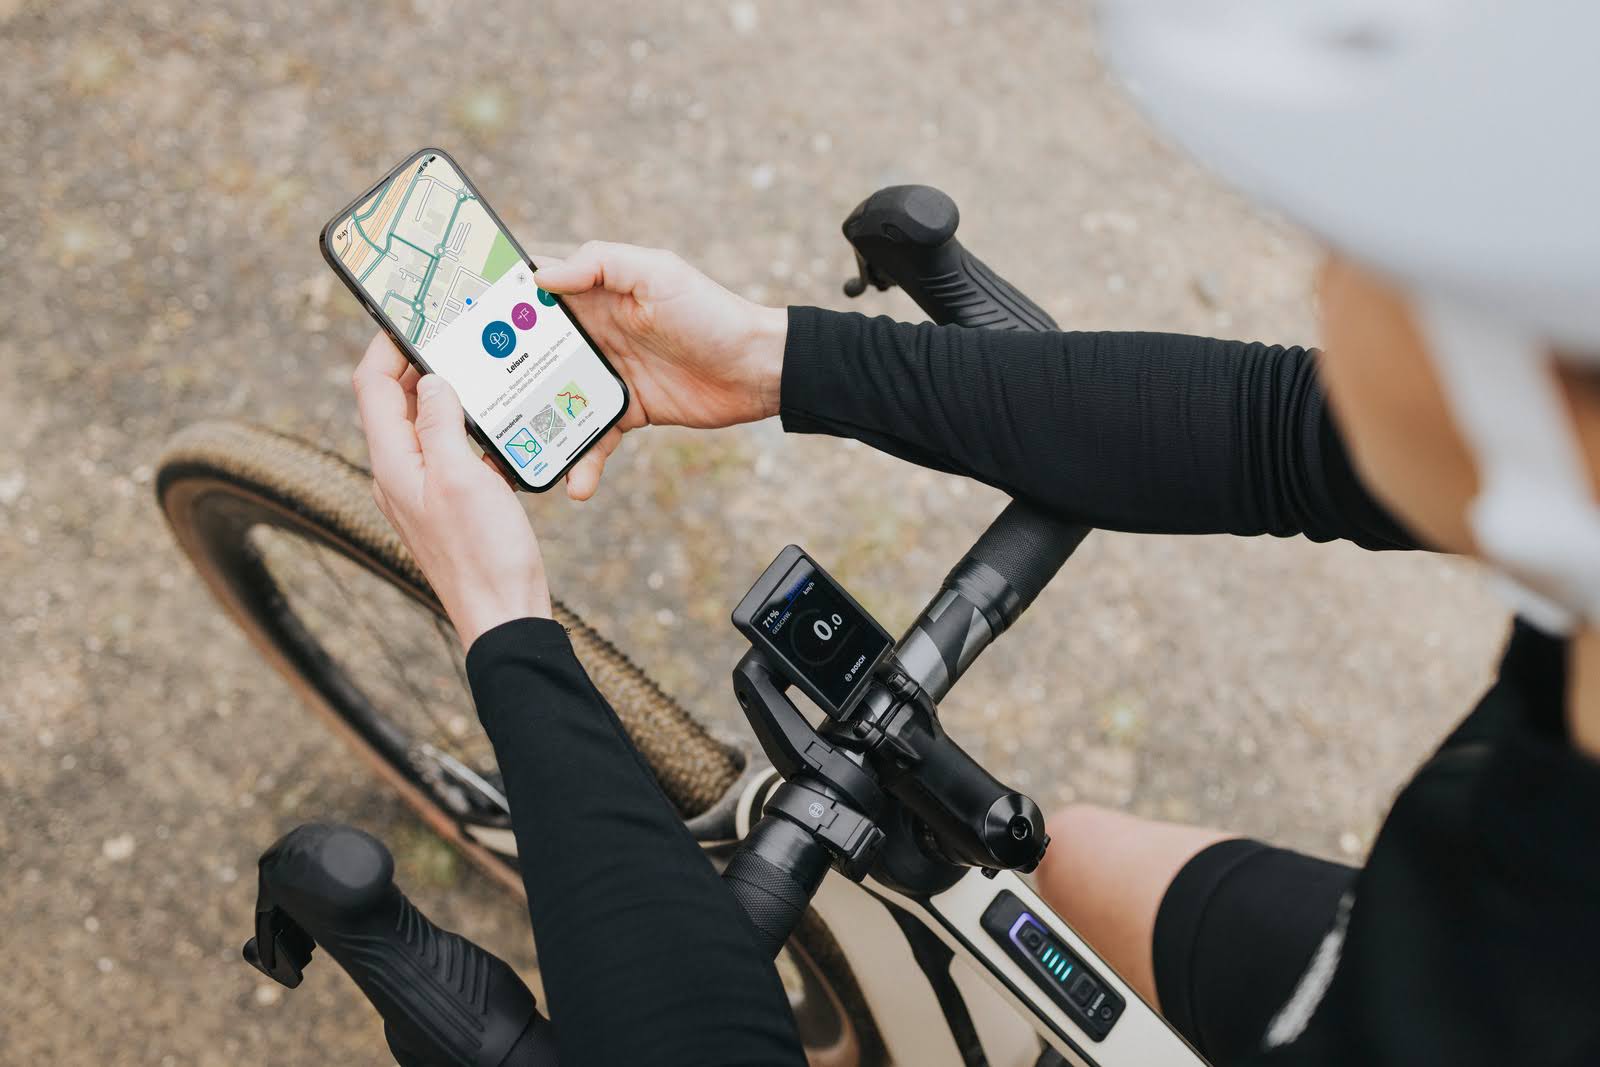 Bosch Smart System and eBike Flow App